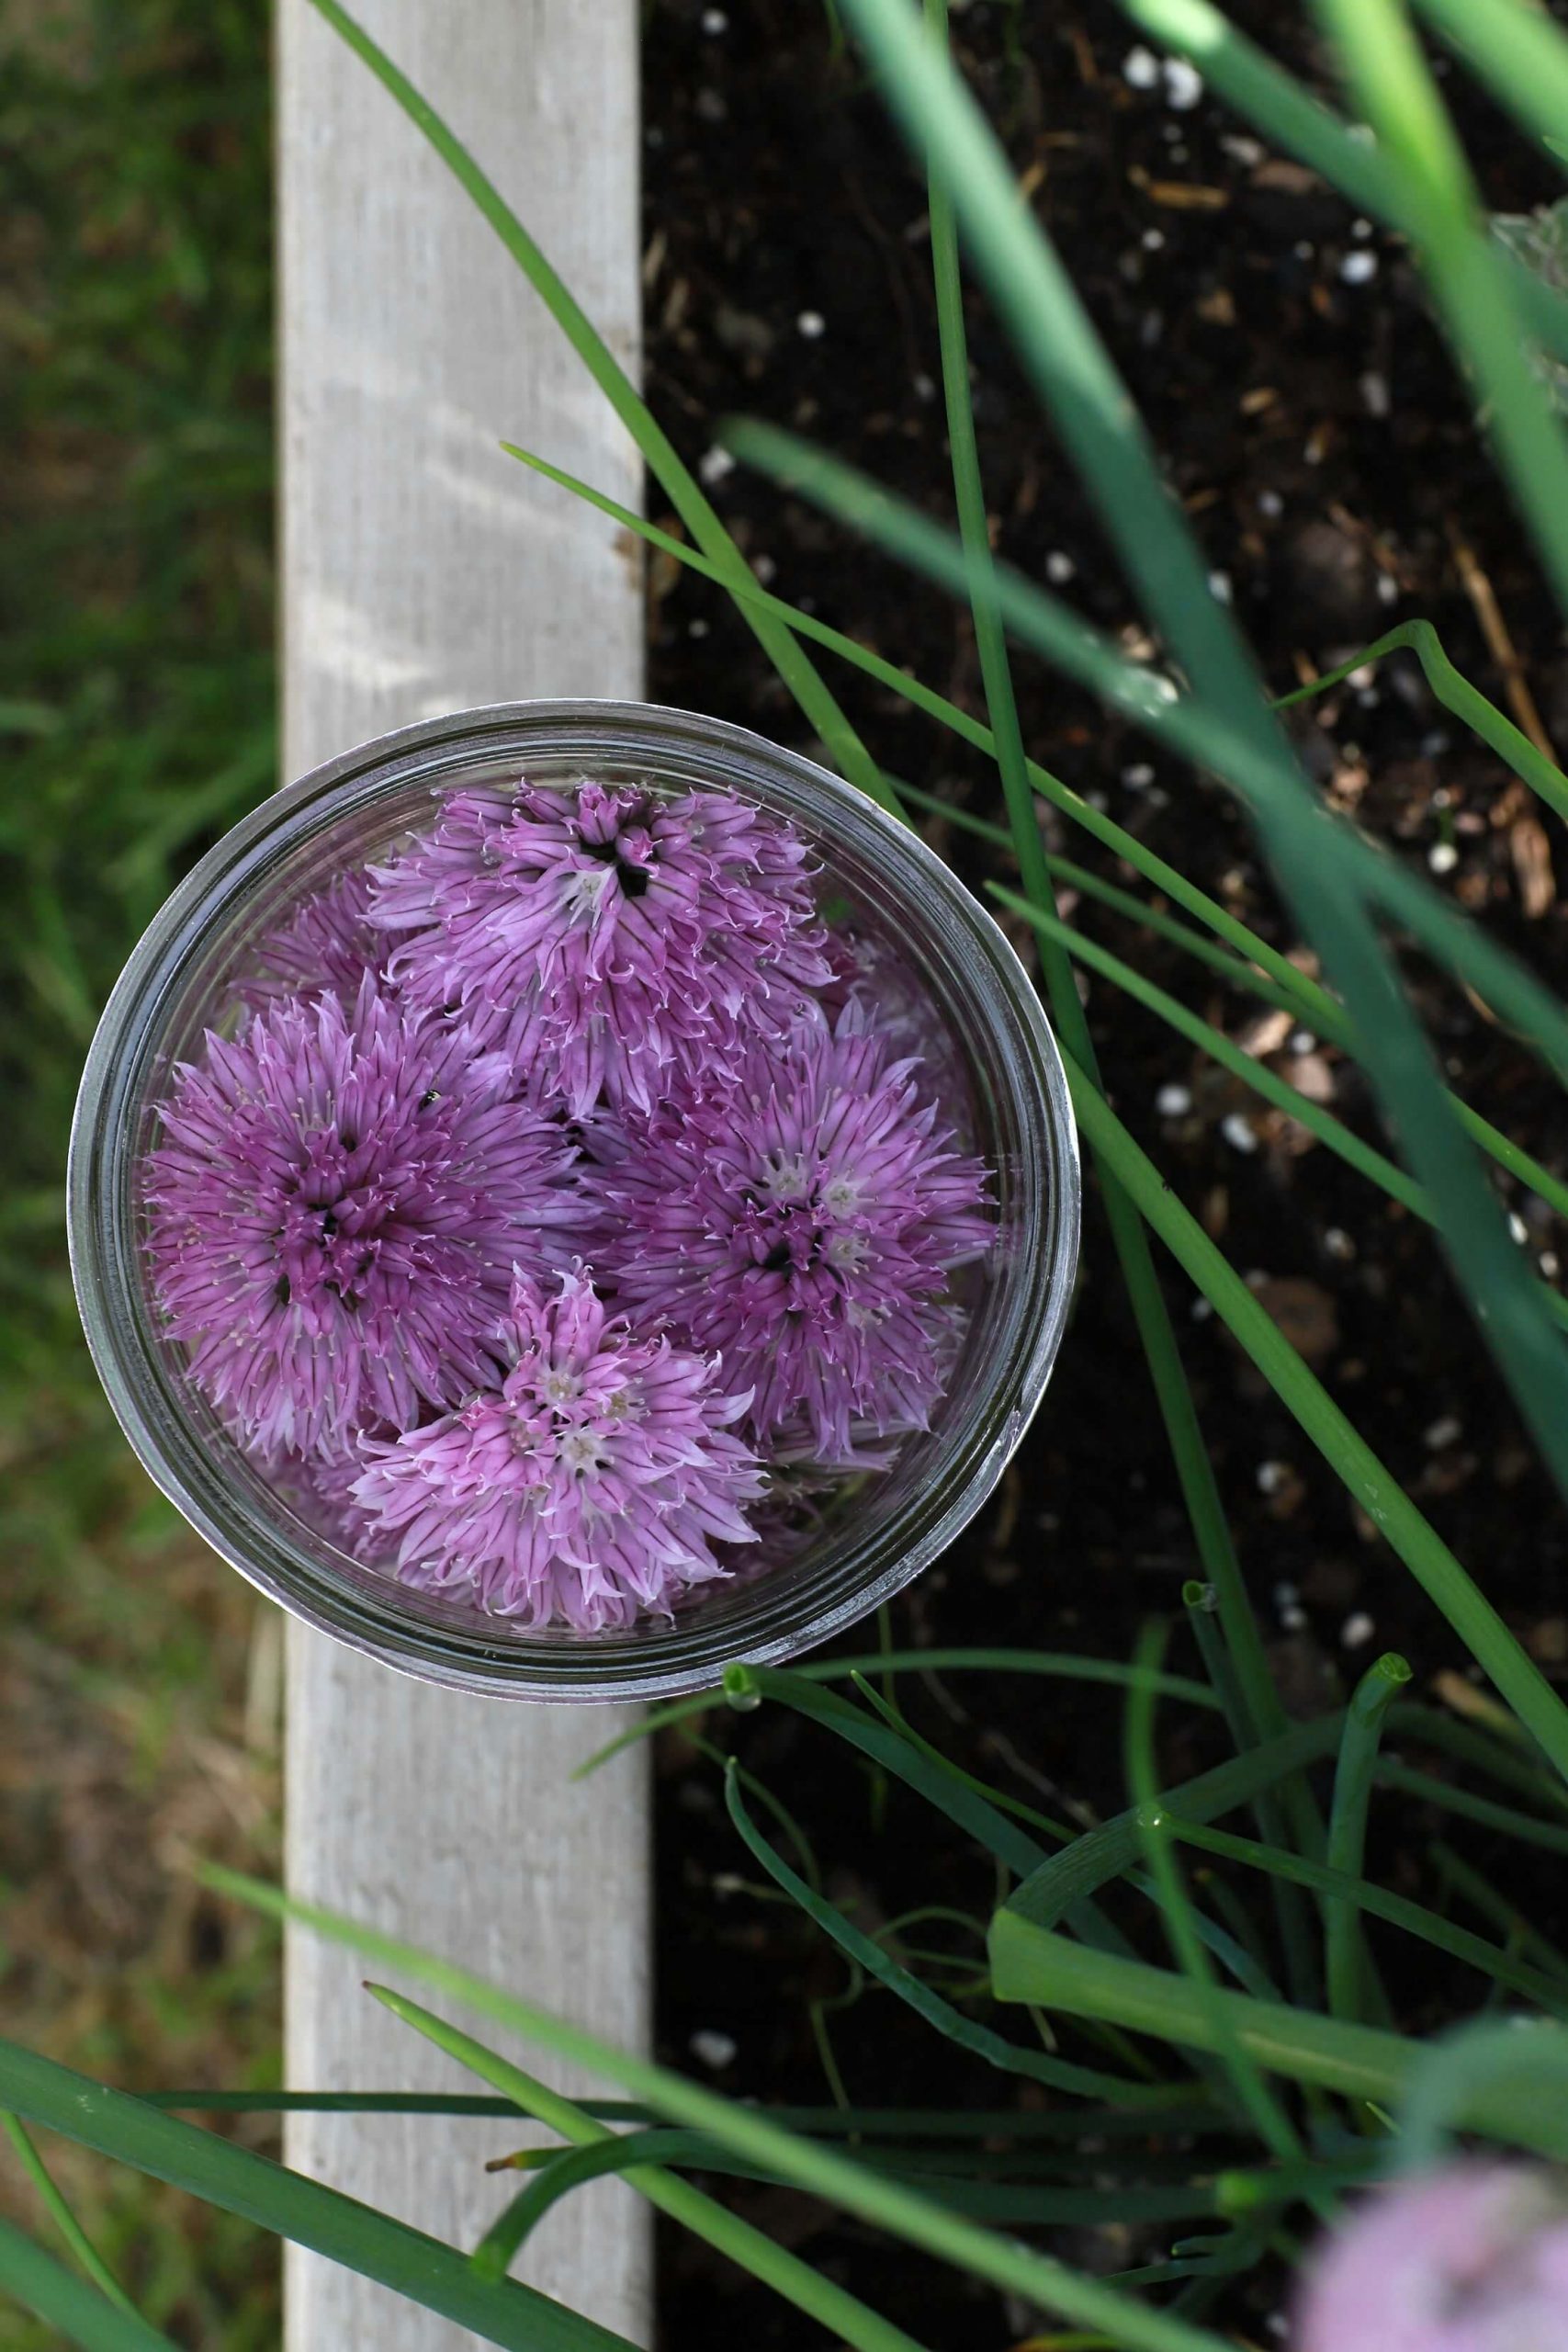 Purple chive blossoms in a glass jar in a garden. 